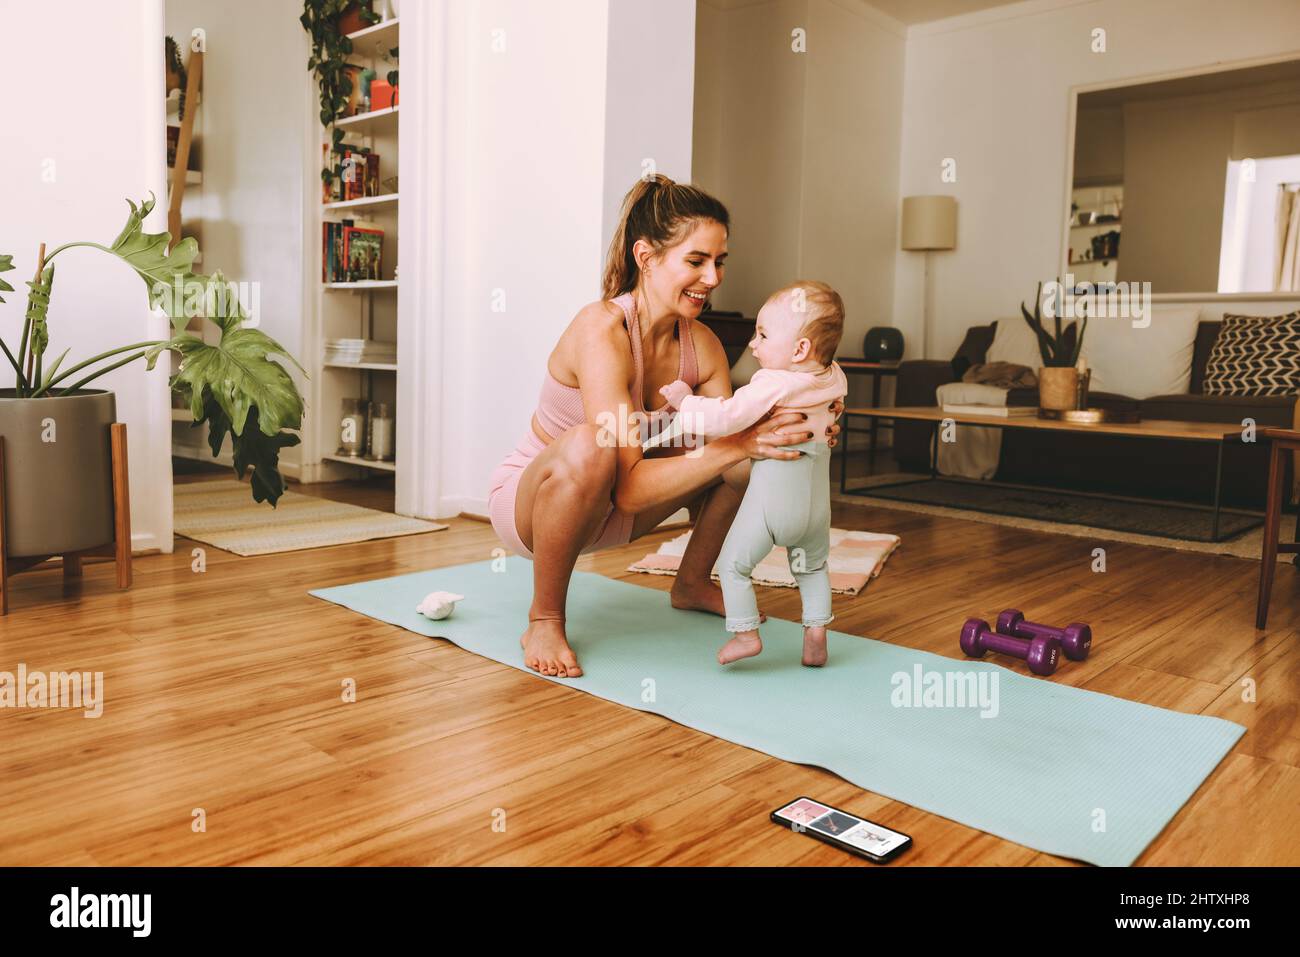 Yogi mom lifting her baby on an exercise mat. Happy mother smiling cheerfully while working out with her baby at home. New mom bonding with her baby d Stock Photo